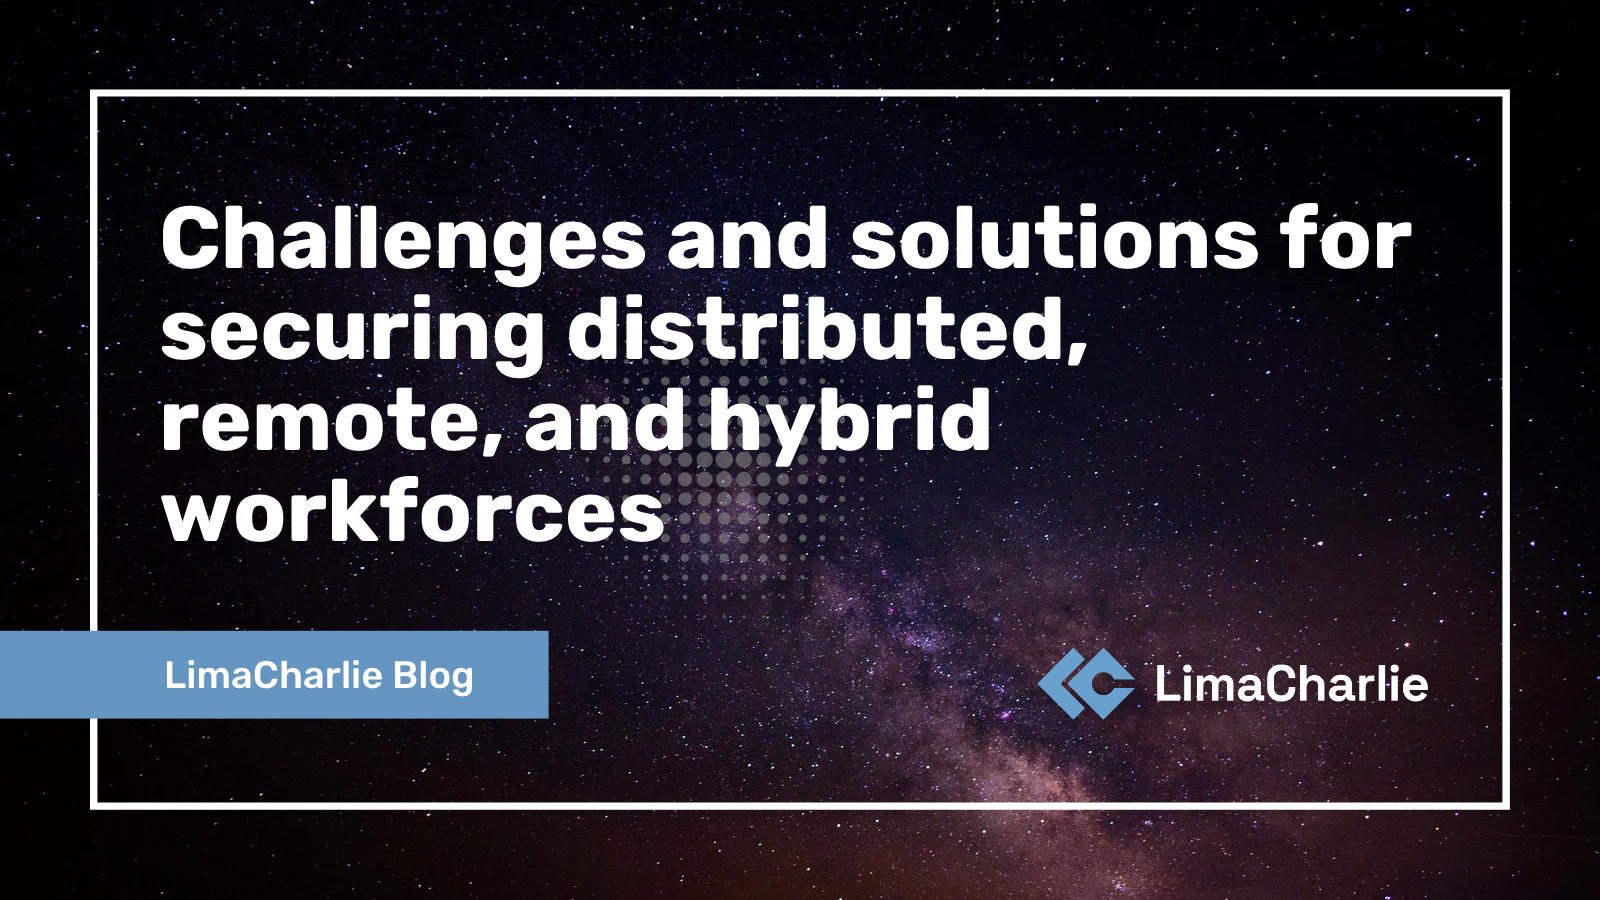 Challenges and solutions for securing distributed, remote and hybrid workforces